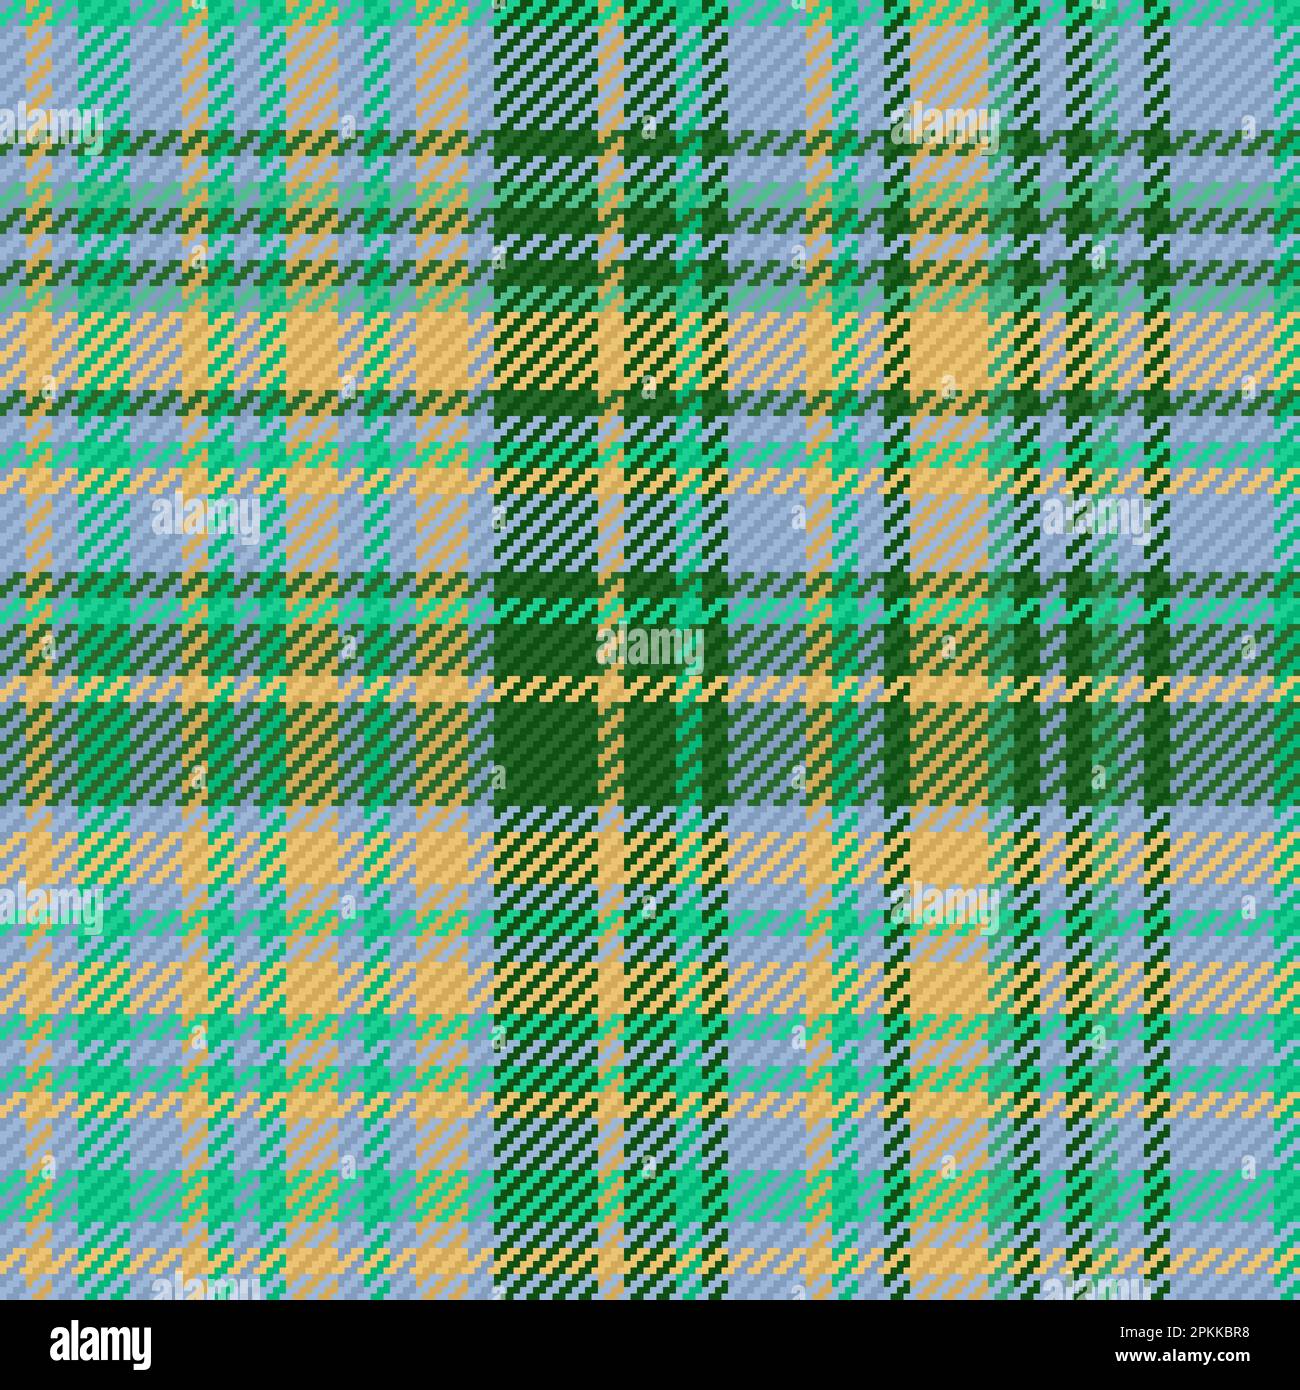 Textile pattern check. Tartan plaid vector. Fabric seamless texture background in amber and turquoise colors. Stock Vector